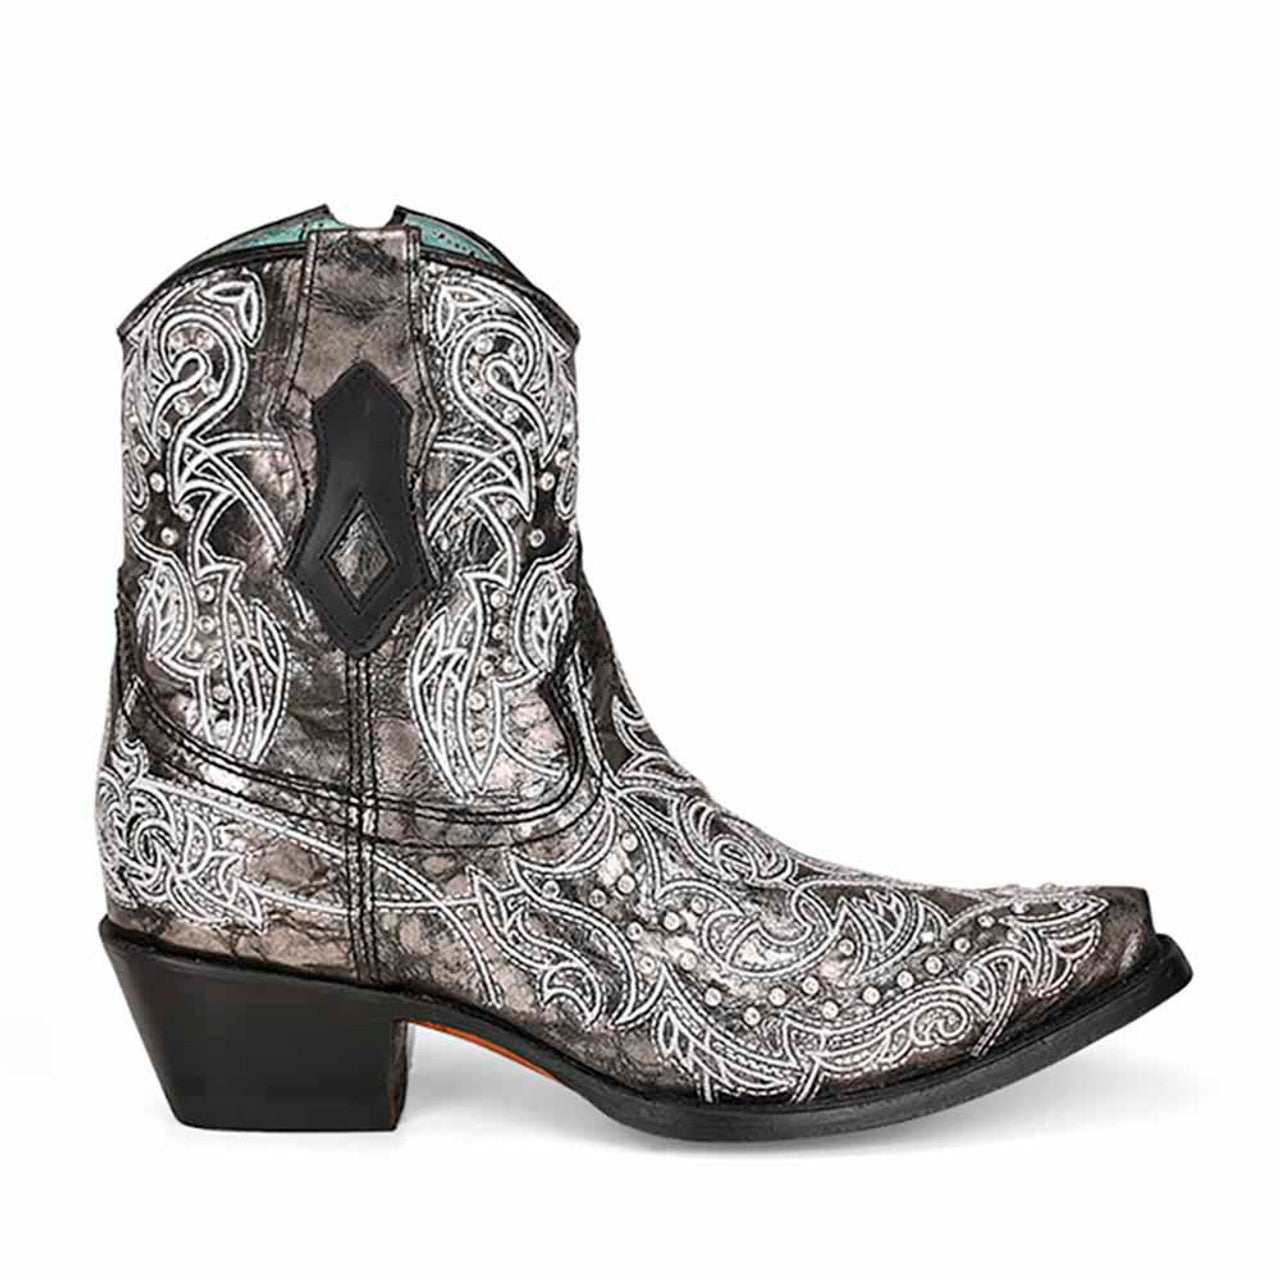 Corral Ladies Black with White Embroidery & Crystals Ankle Boots C3923